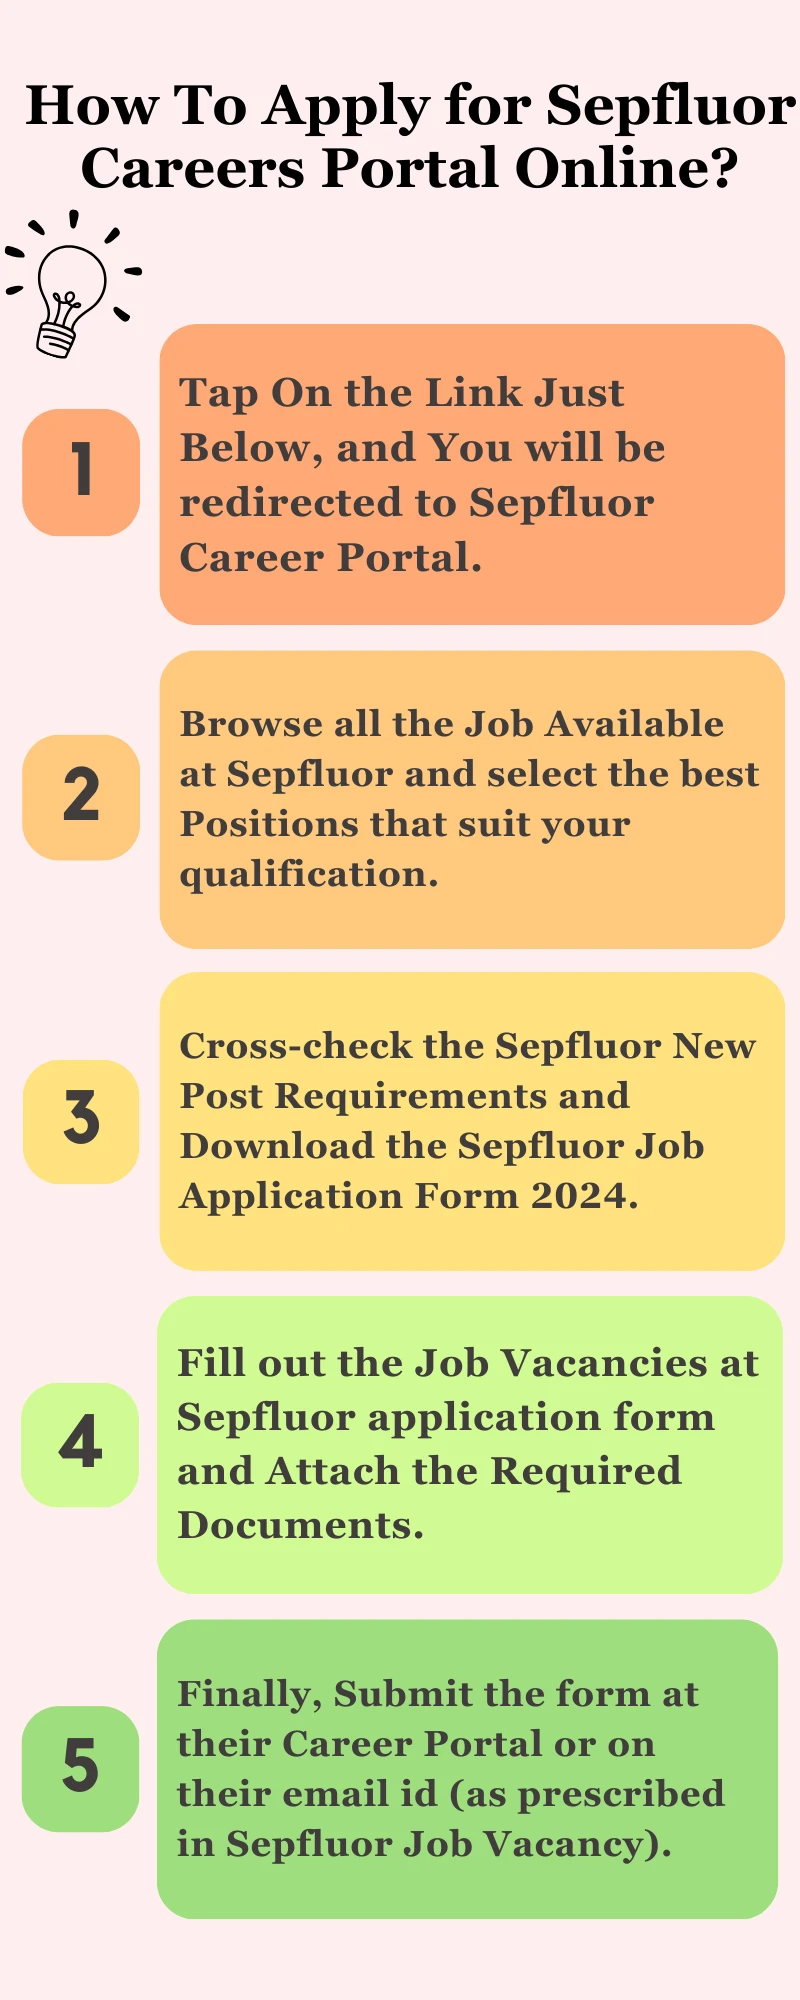 How To Apply for Sepfluor Careers Portal Online?